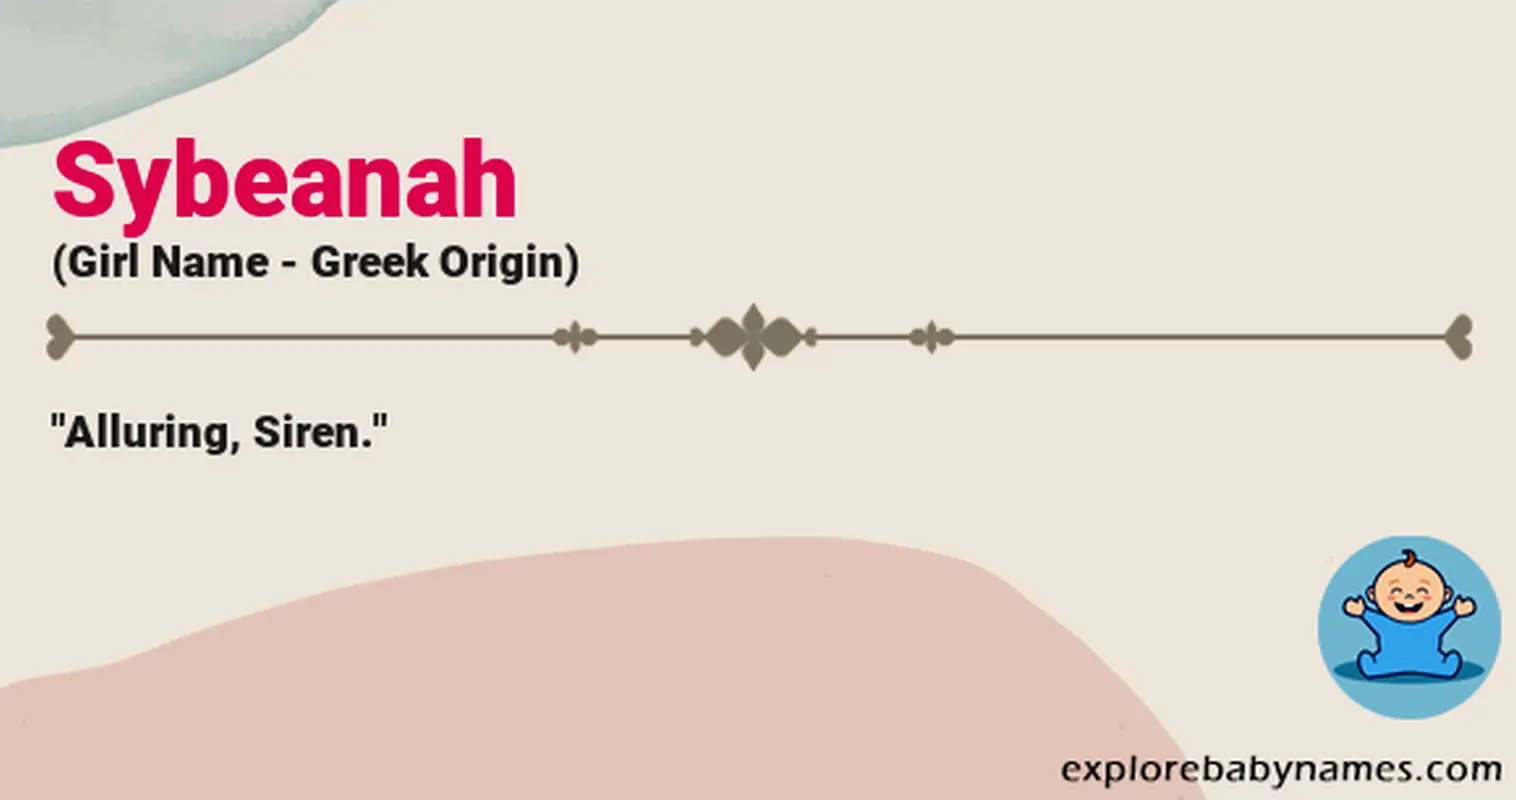 Meaning of Sybeanah